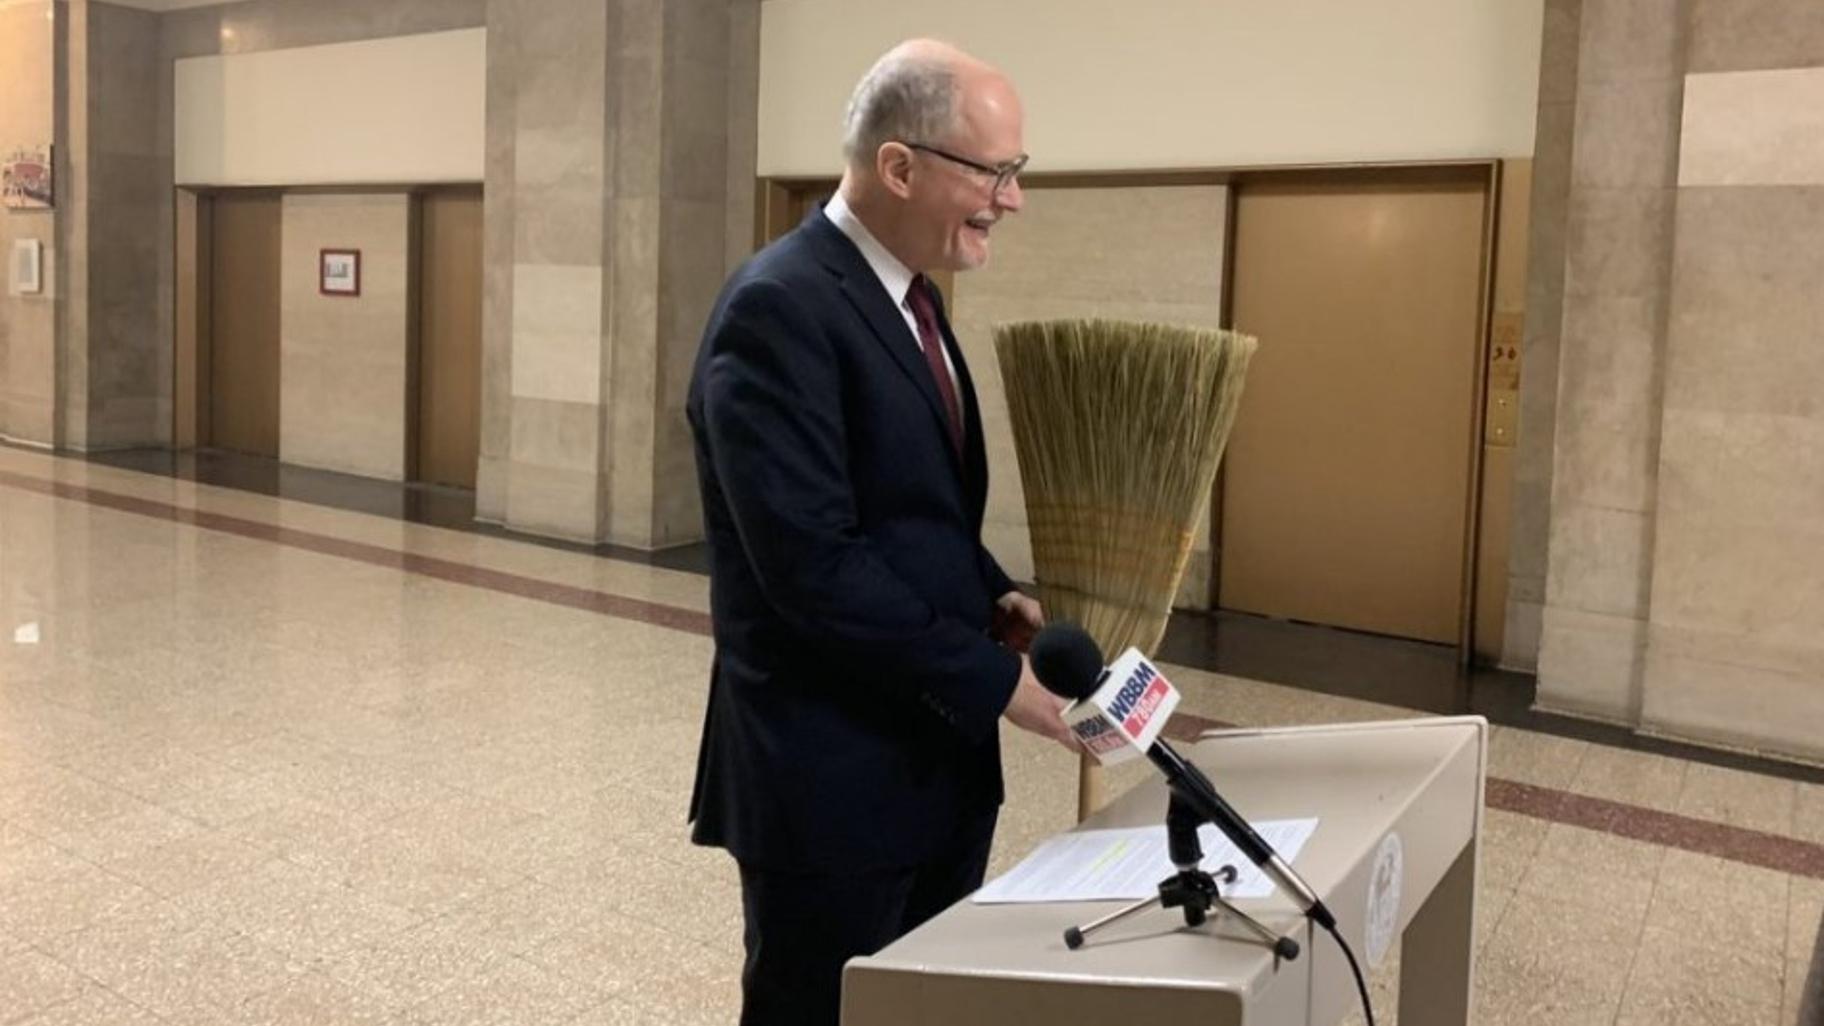 During the 2019 mayoral election, candidate Paul Vallas often appeared at news conferences brandishing a broom to illustrate his vow to clean up City Hall and rid it of corruption. (Heather Cherone / WTTW News)